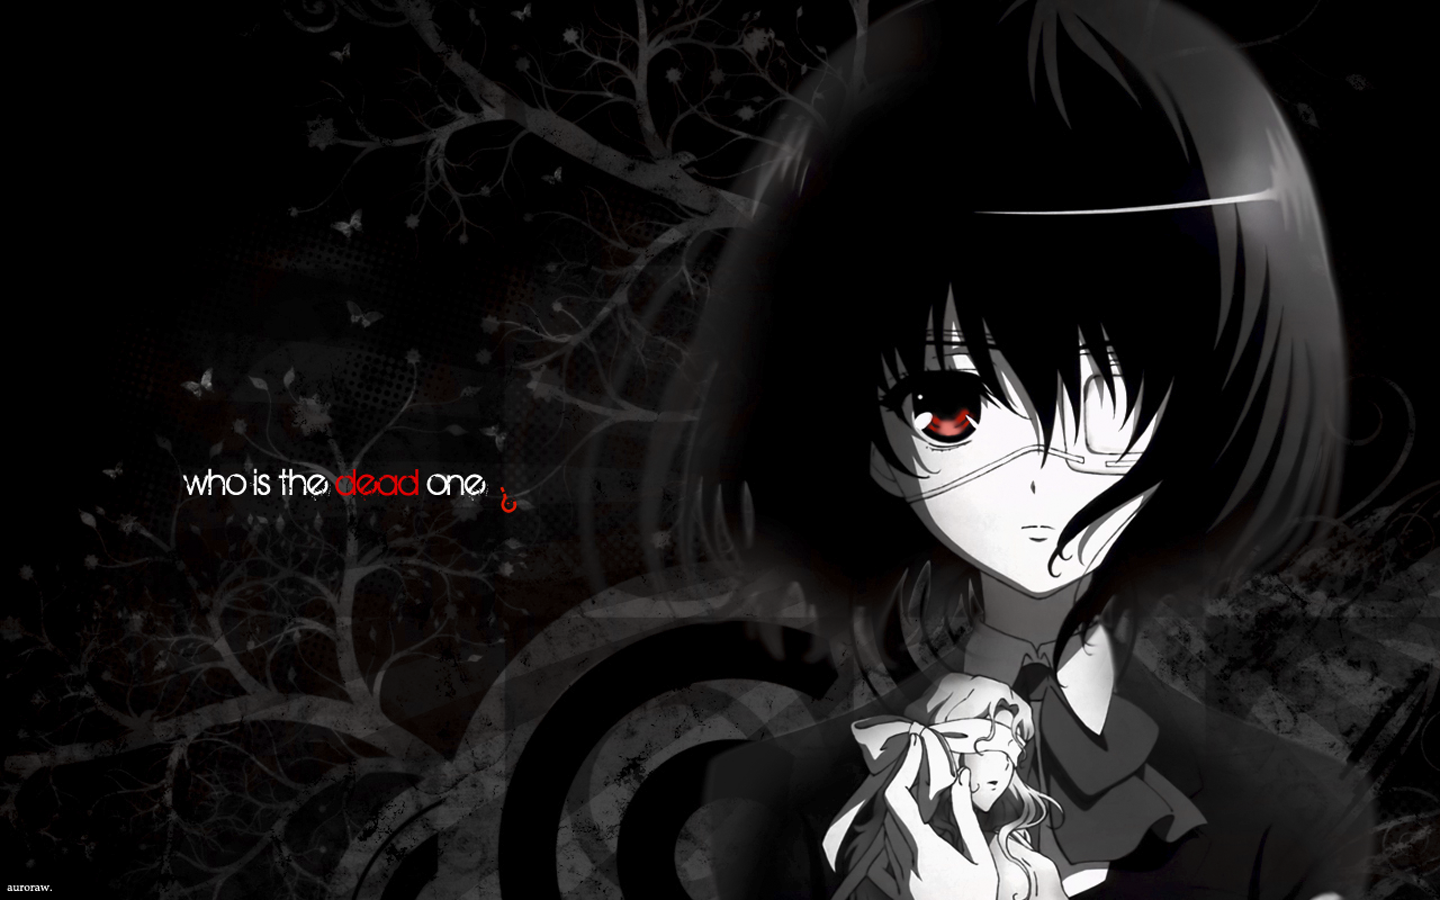 Anime 1440x900 Another Misaki Mei anime girls anime eyepatches red eyes selective coloring